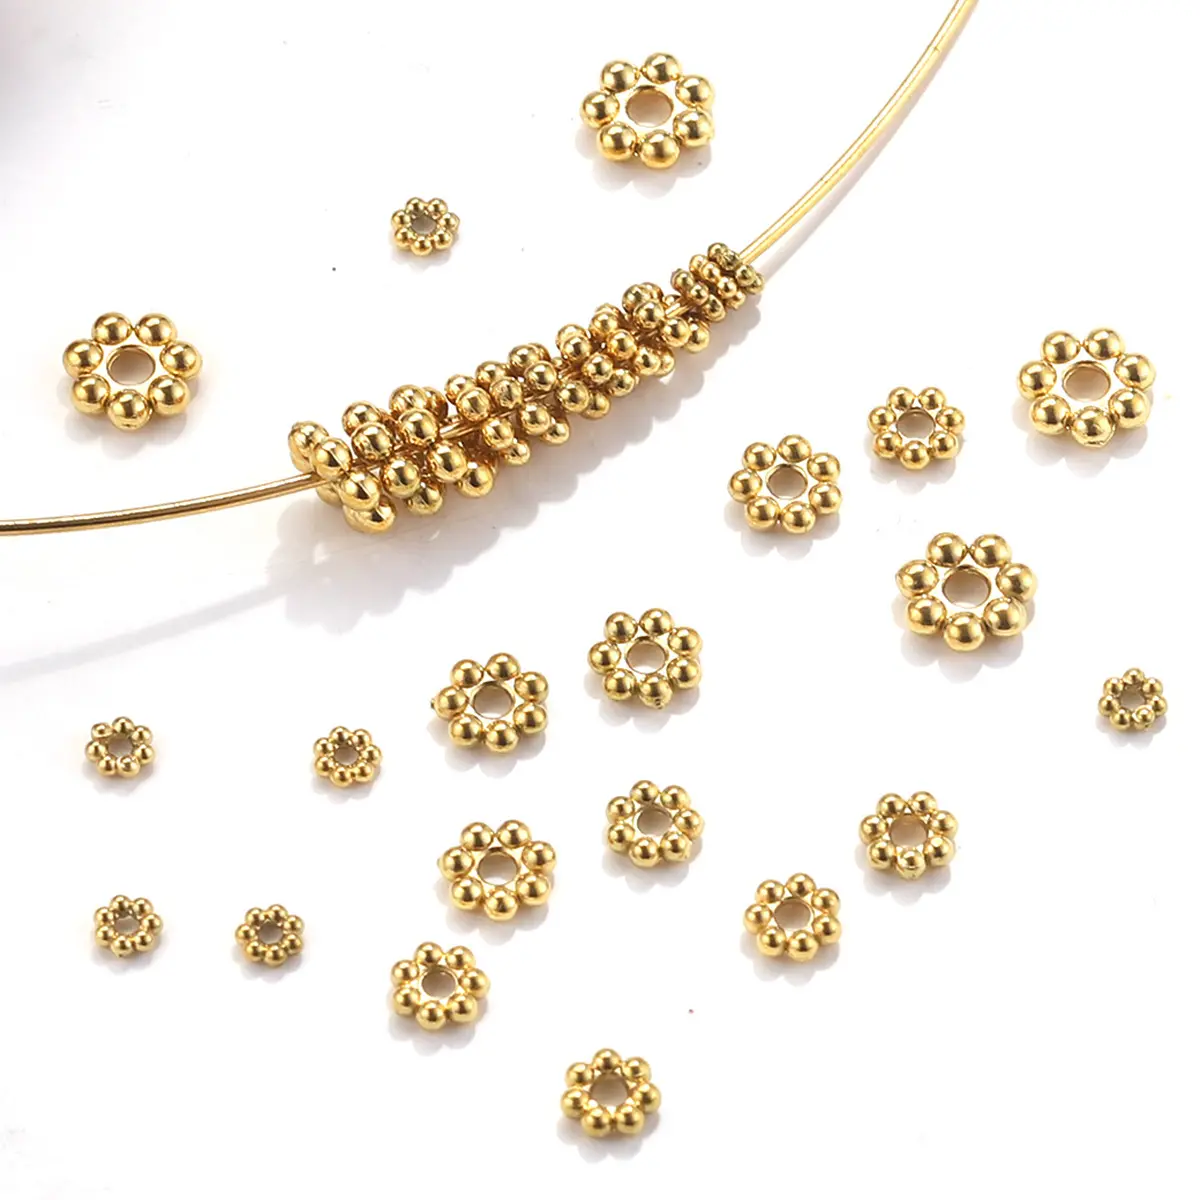 Hoyo stainless Steel Daisy Snow Flake Flower Spacer Beads Gold Plated Charms Loose Bead Connector For Diy Jewelry Making